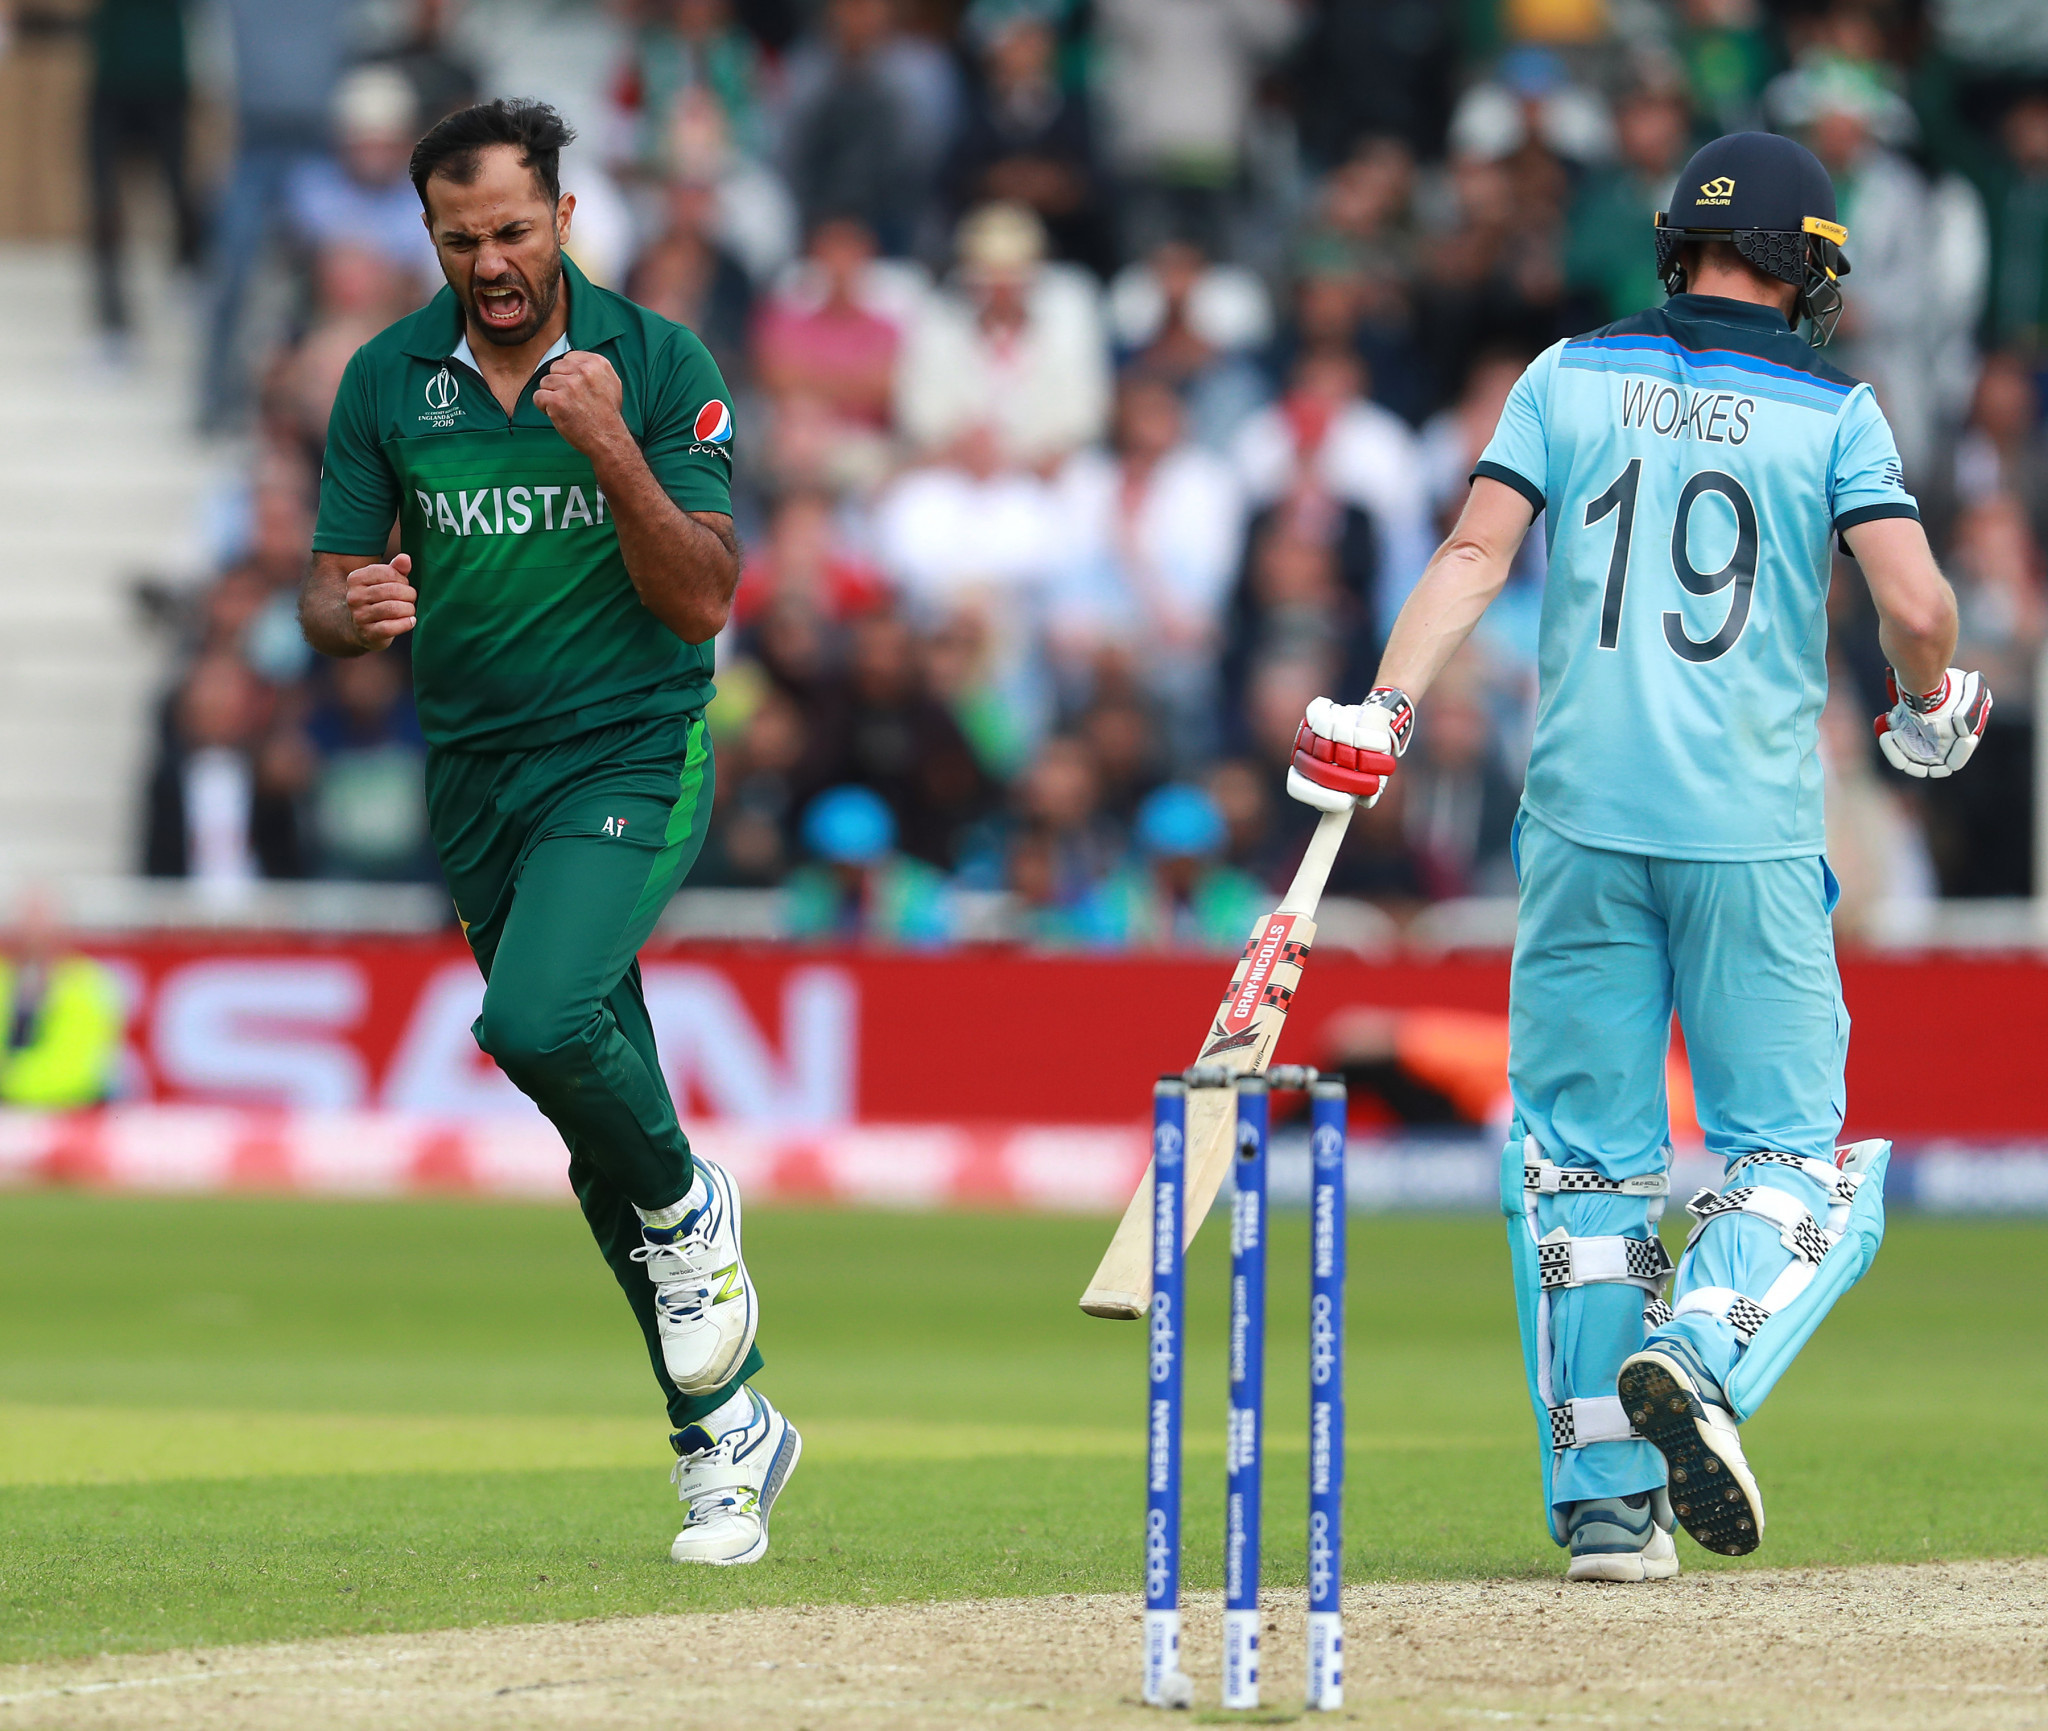 Pakistan earned a shock 14-run victory over England at the Cricket World Cup at Trent Bridge in Nottingham ©Getty Images